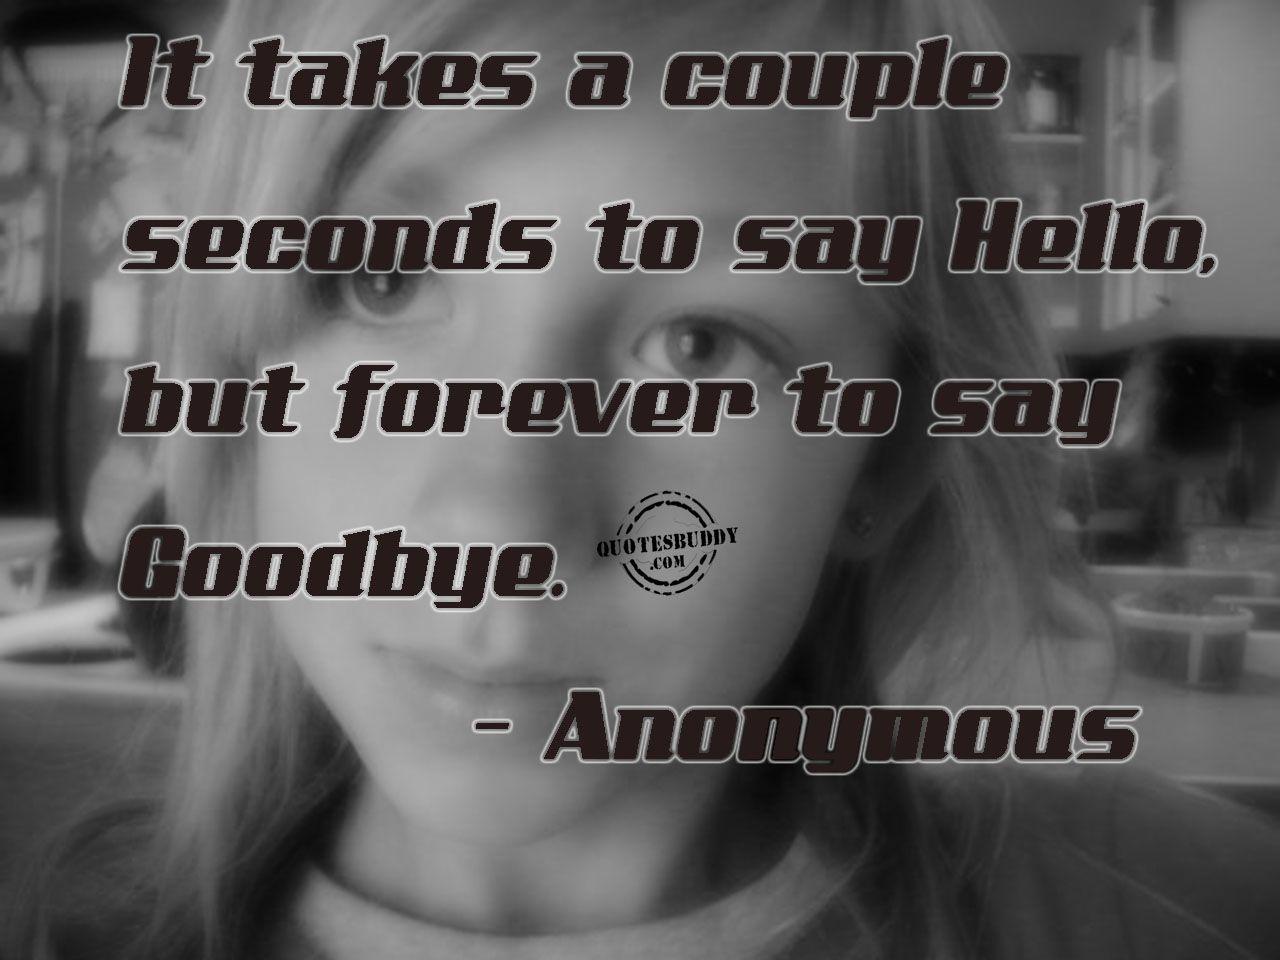 √ Love Break Up Quotes Hd Wallpapers